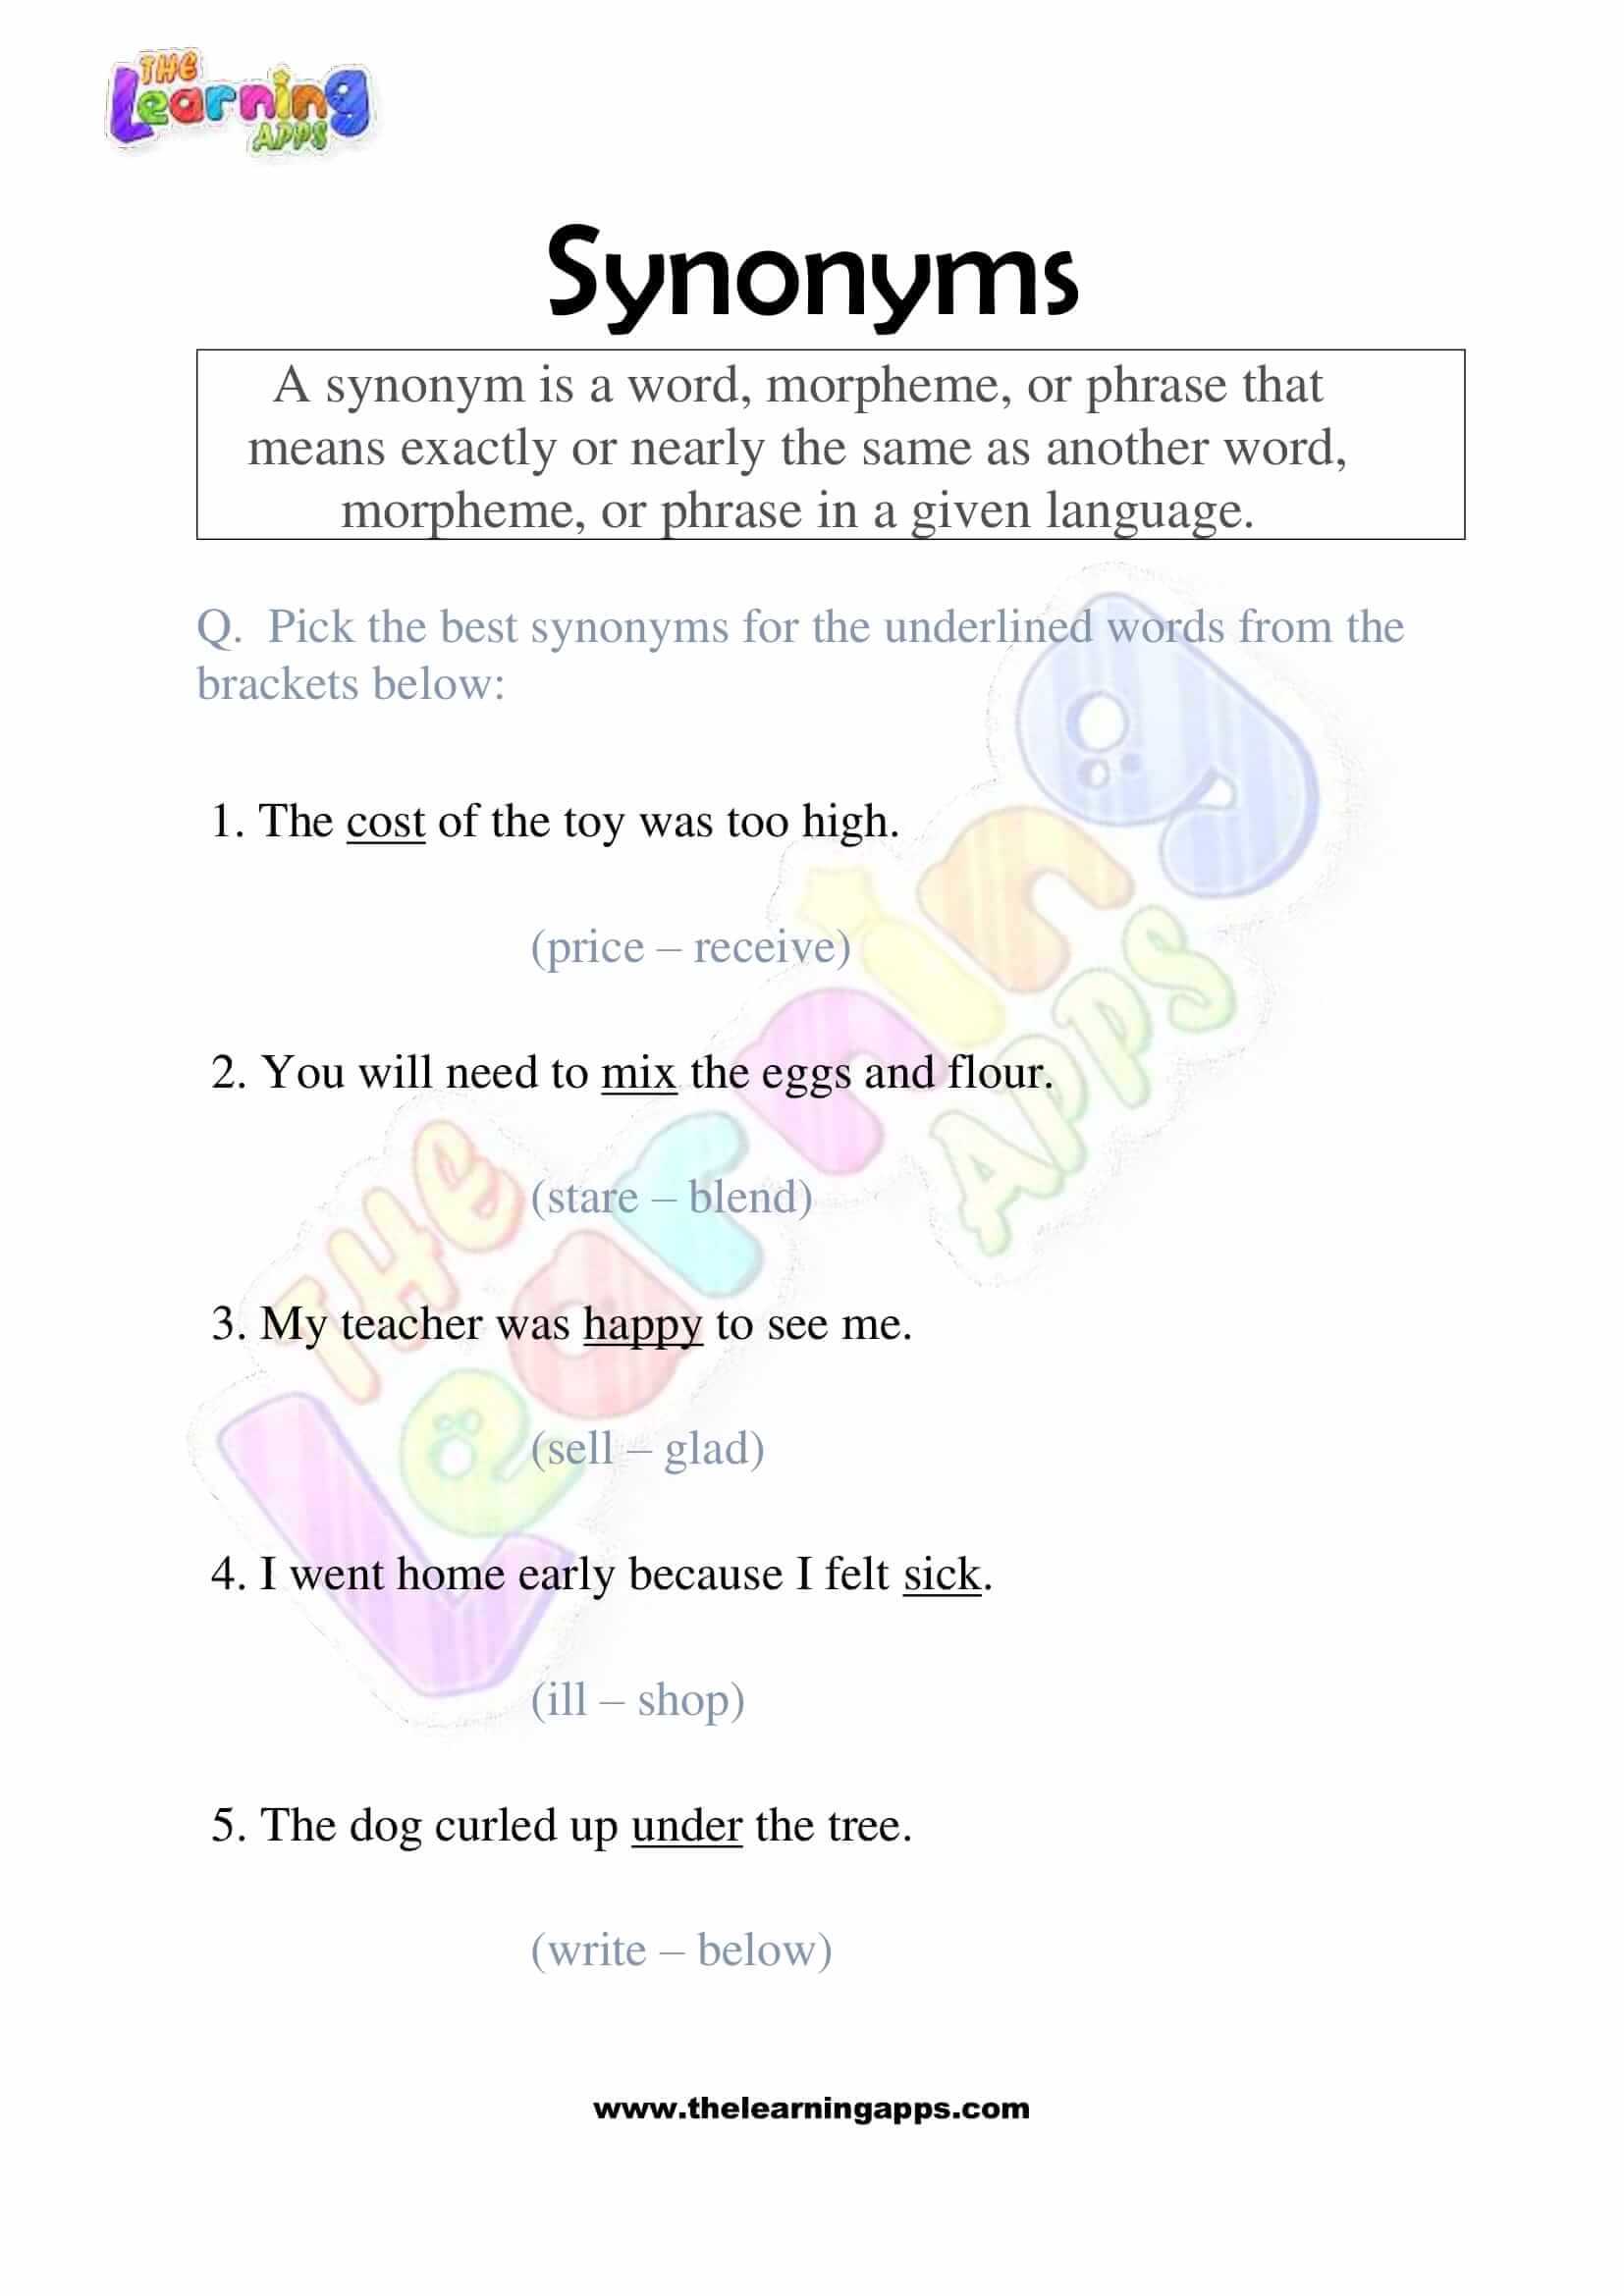 Free Synonyms Worksheet 06 For Kids